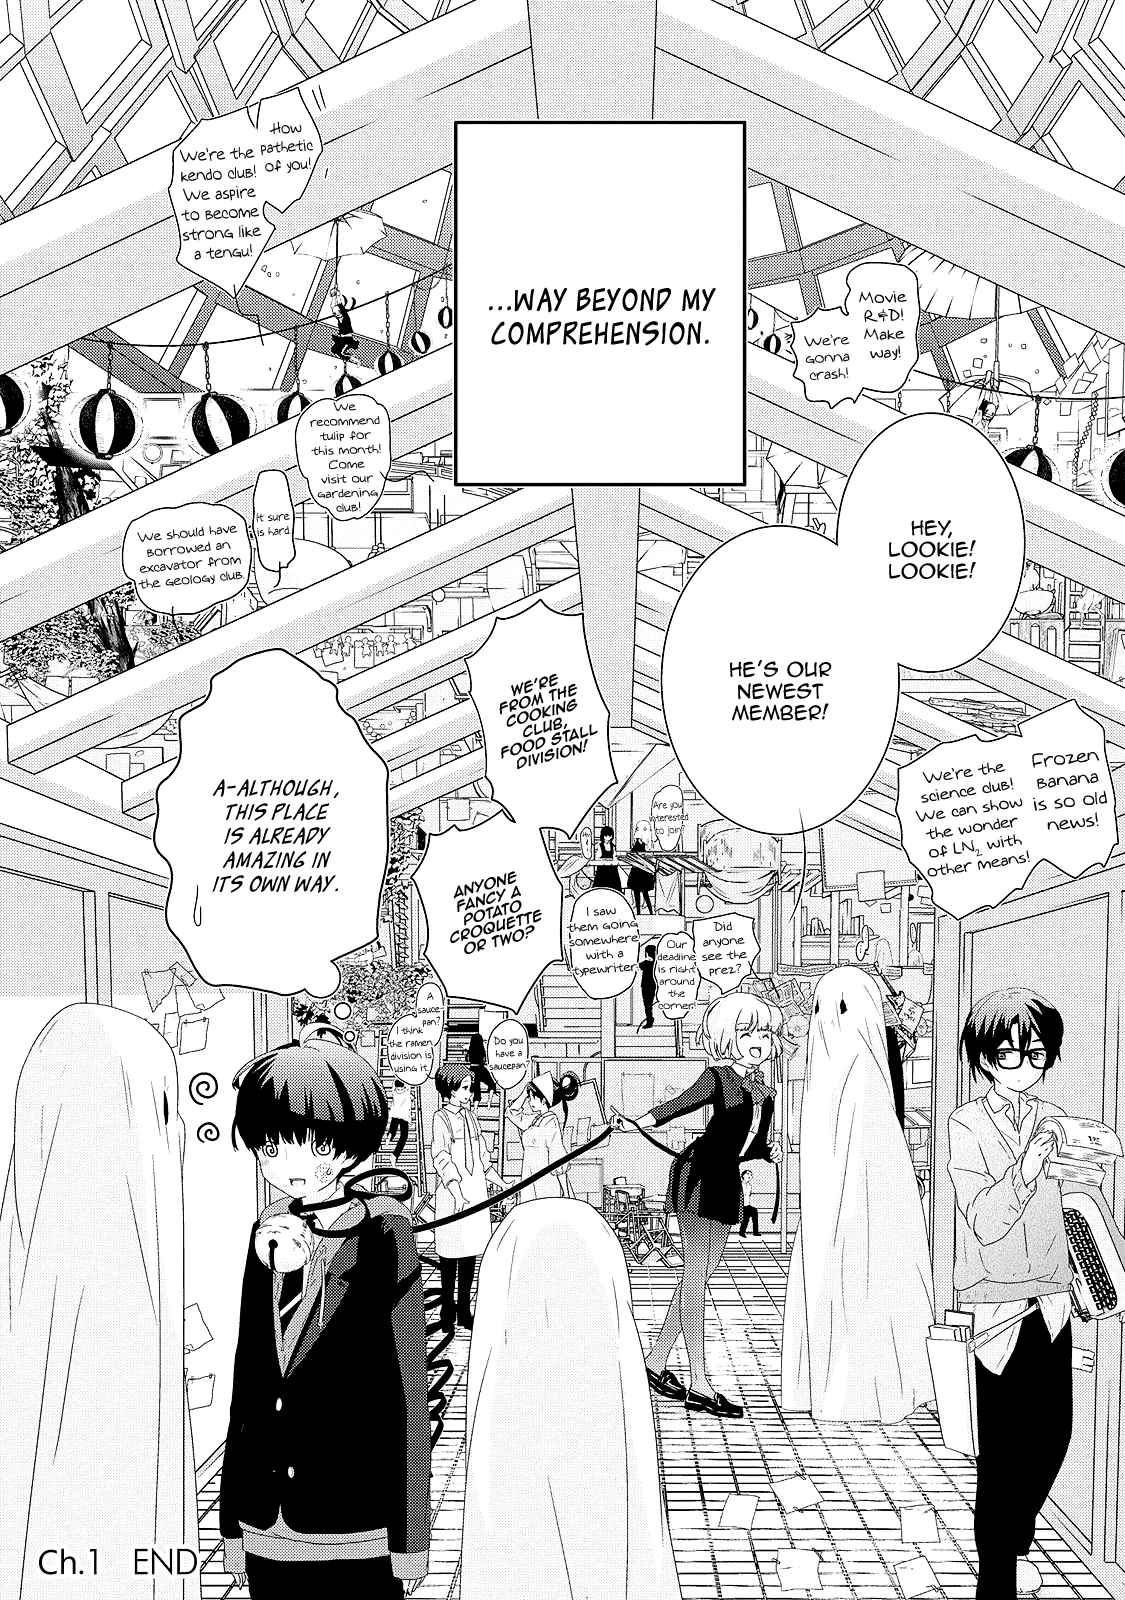 The Female God of Babel: KAMISAMA Club in Tower of Babel Vol. 1 Ch. 1 Welcome to [The Lesser Tower of Clubs]